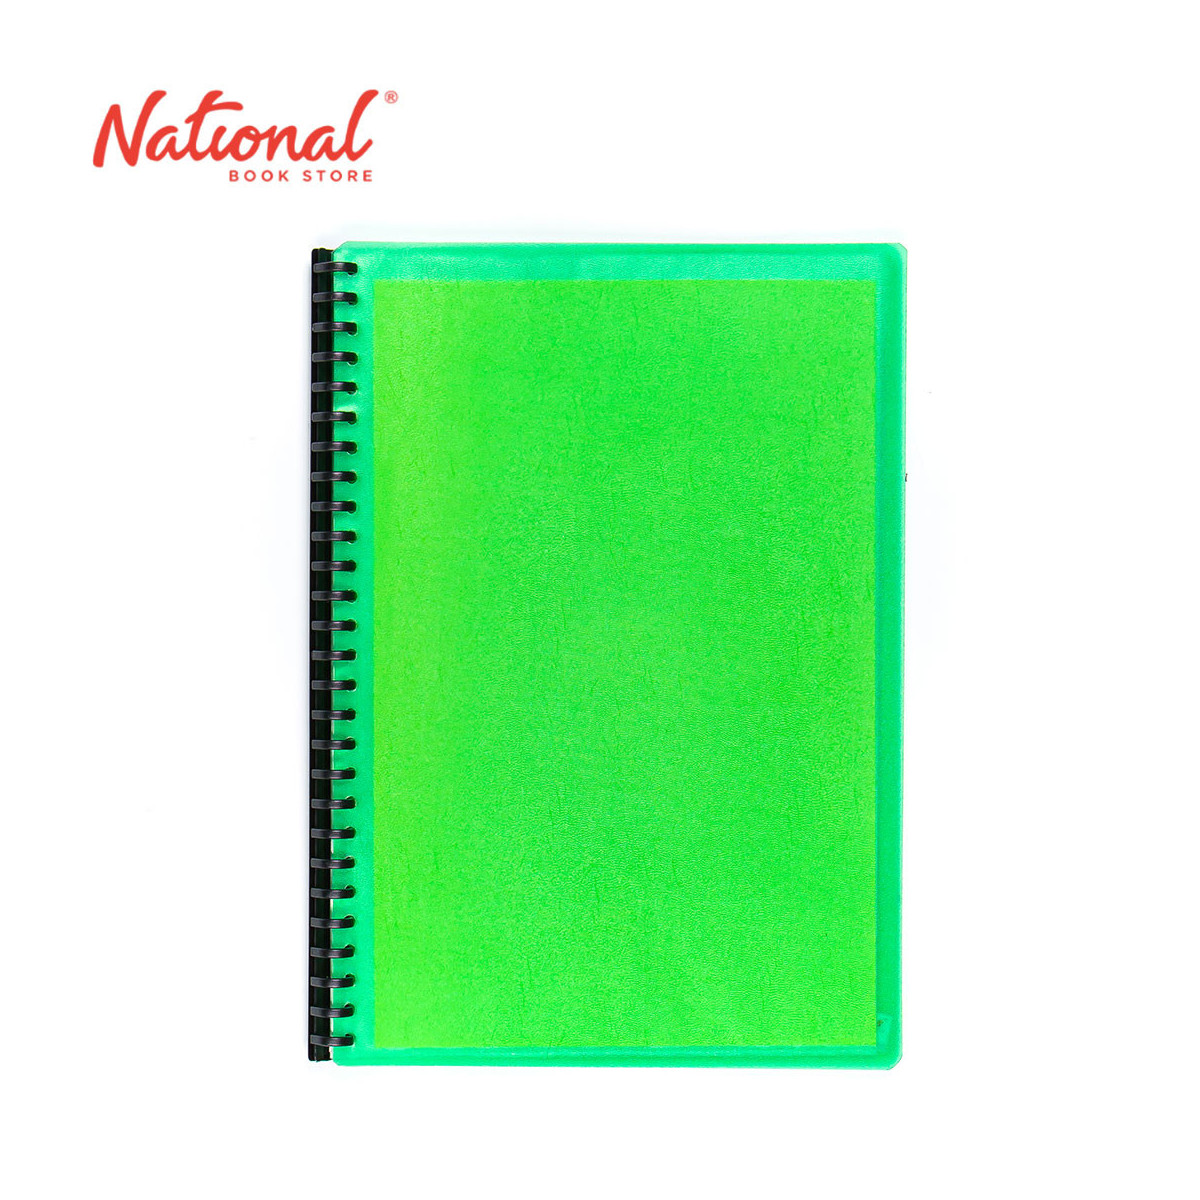 Seagull Clearbook Refillable 9927 Long 20 Sheets 27 Holes Transparent Cover Diagonal Lines Green